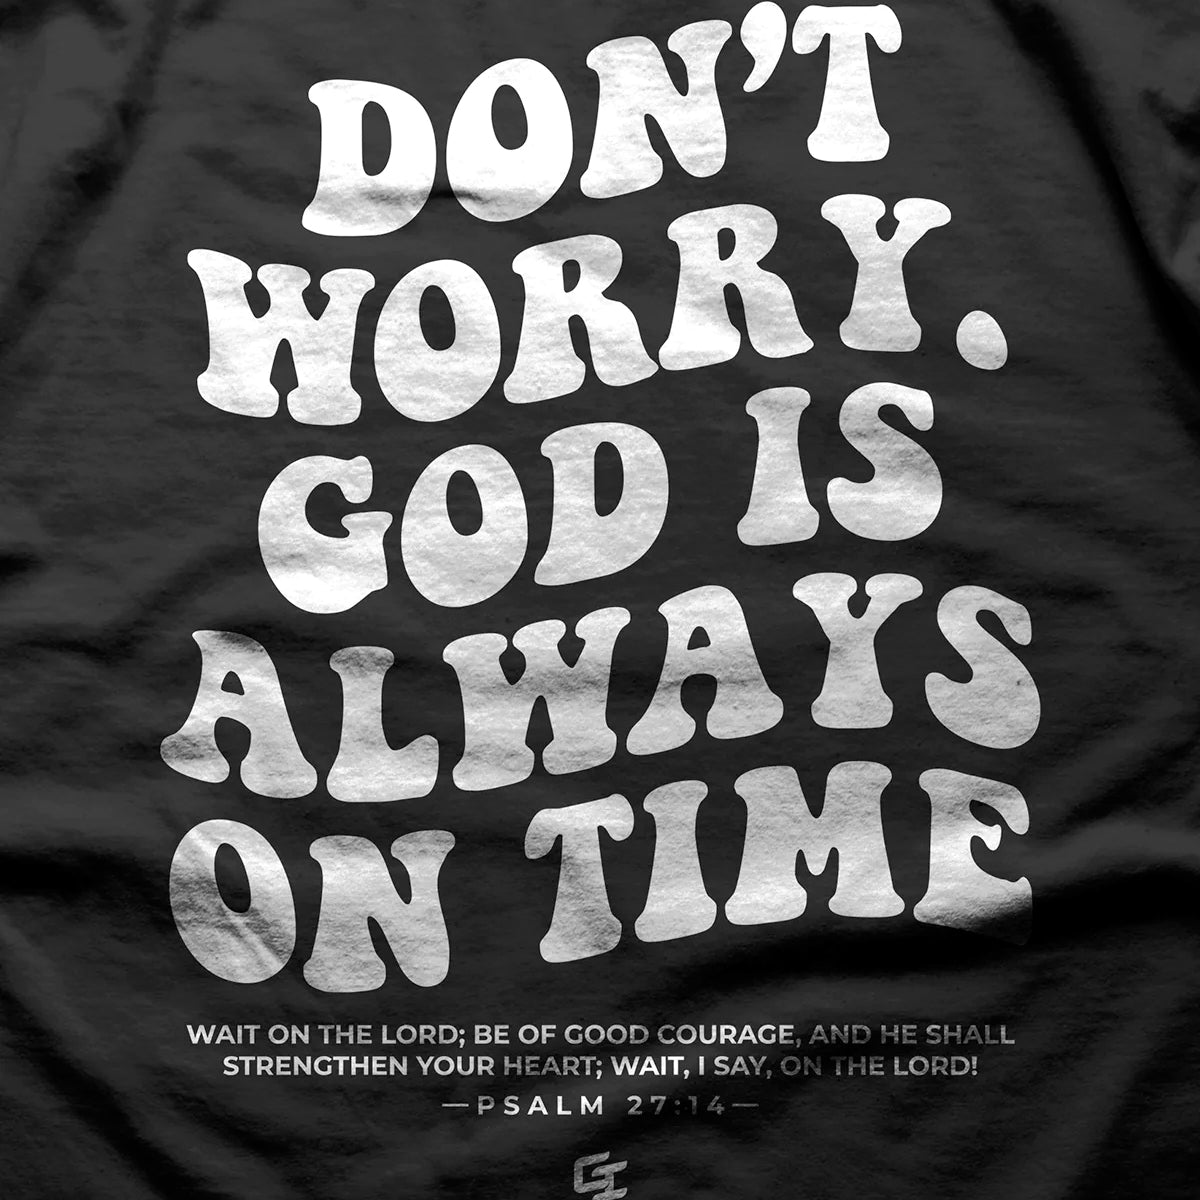 Epiphany 'God Is Always On Time' Lightweight T-Shirt